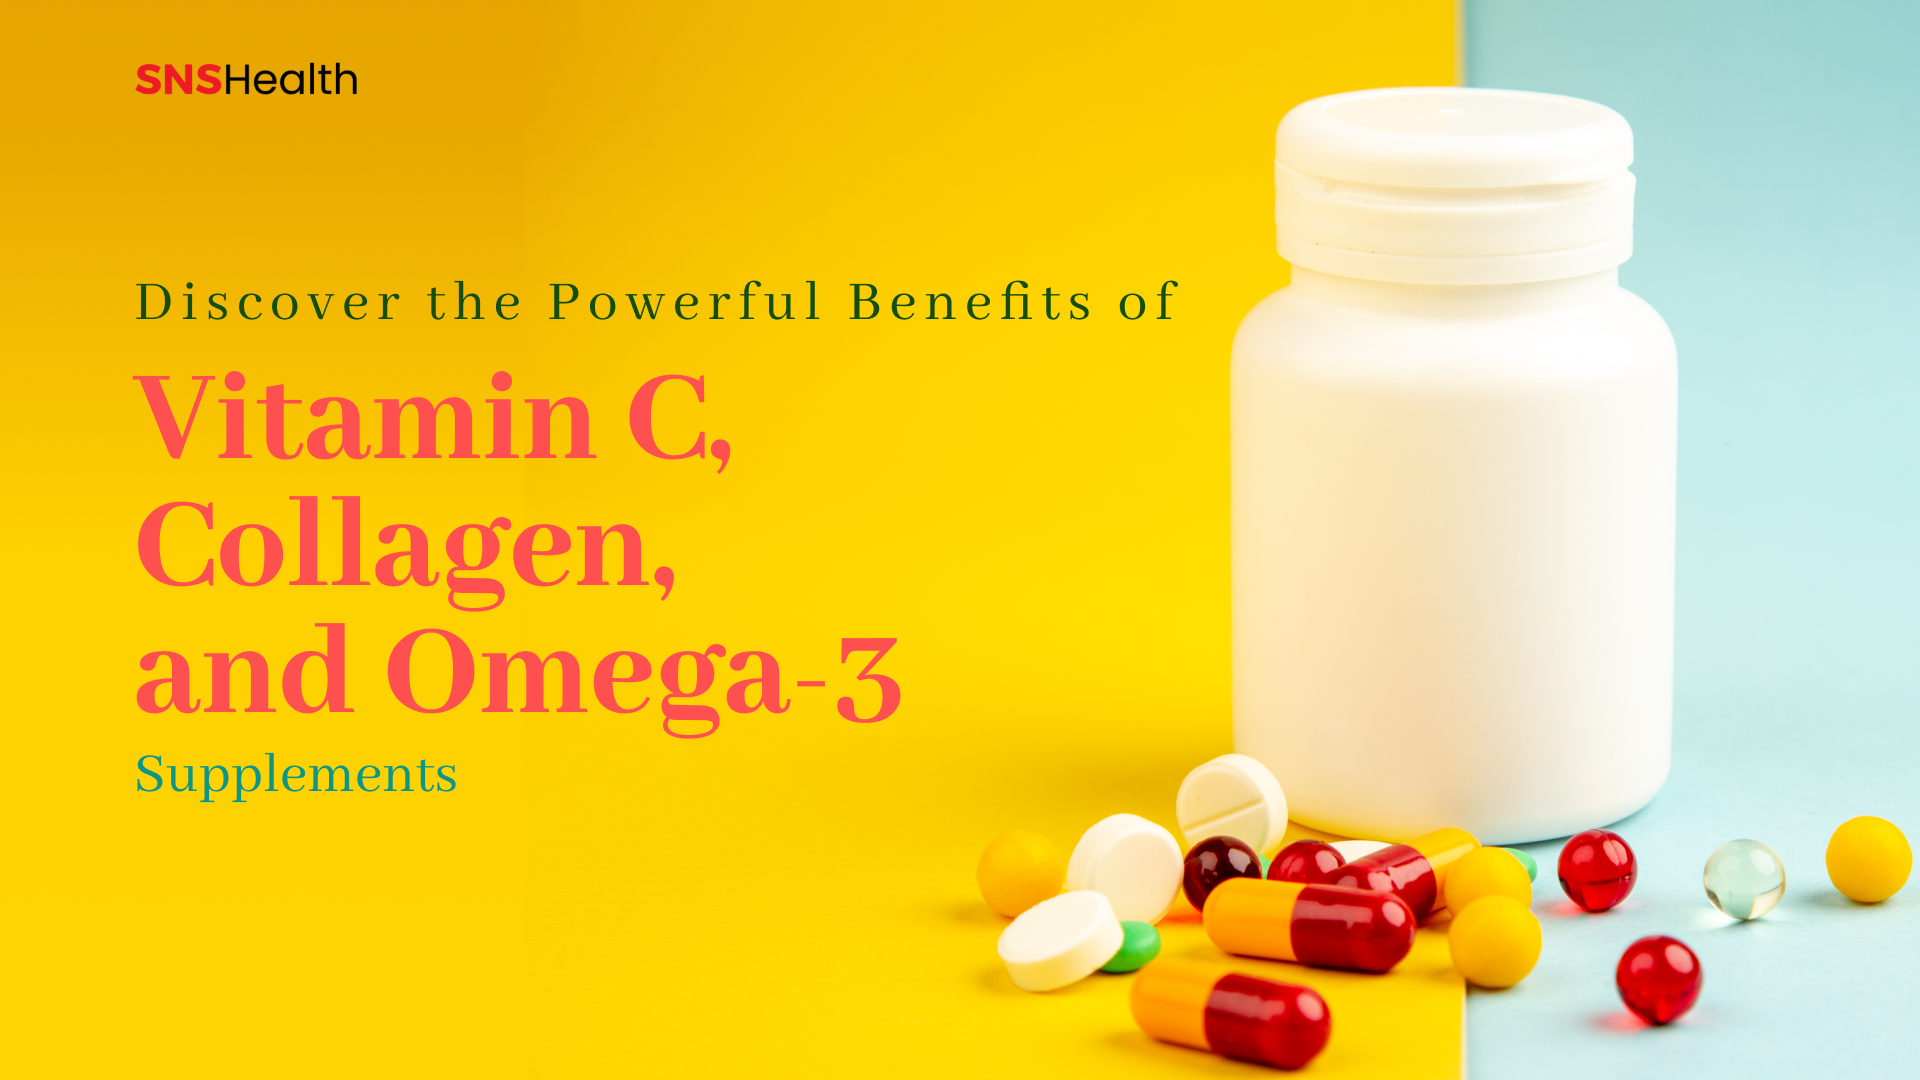 Discover the Powerful Benefits of Vitamin C, Collagen, and Omega-3 Supplements